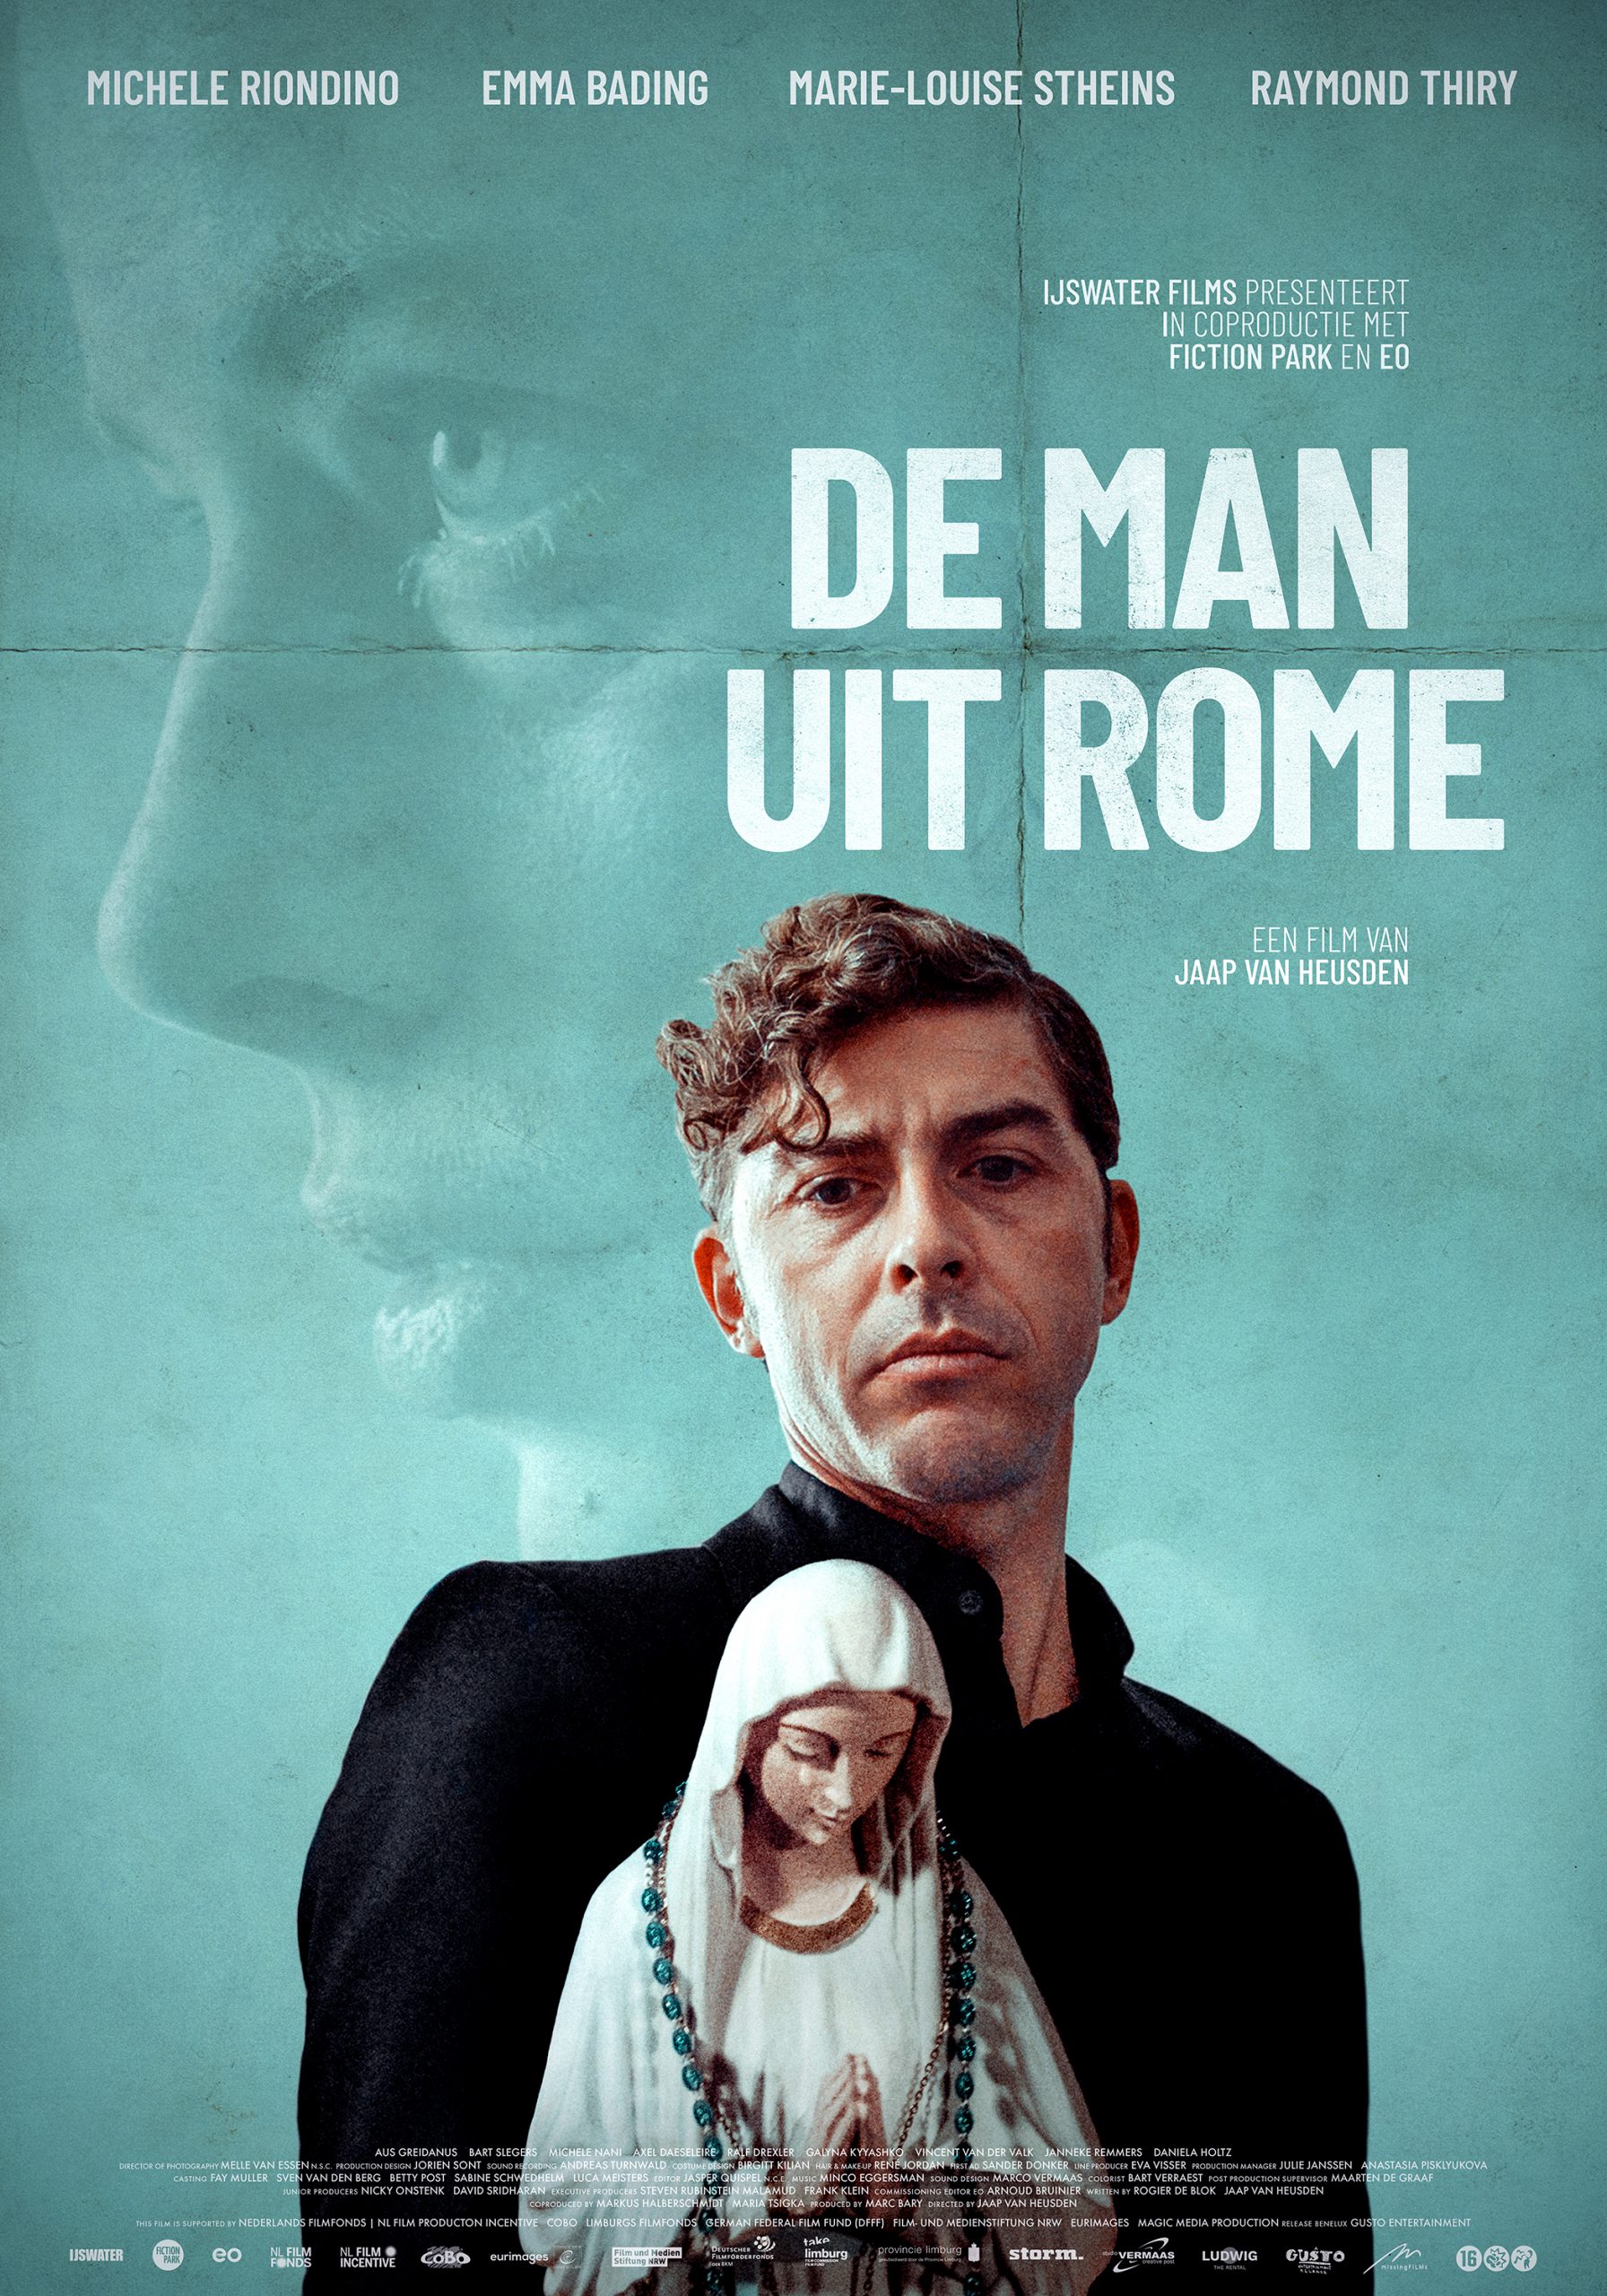 NEW UPCOMING FILM: THE MAN FROM ROME